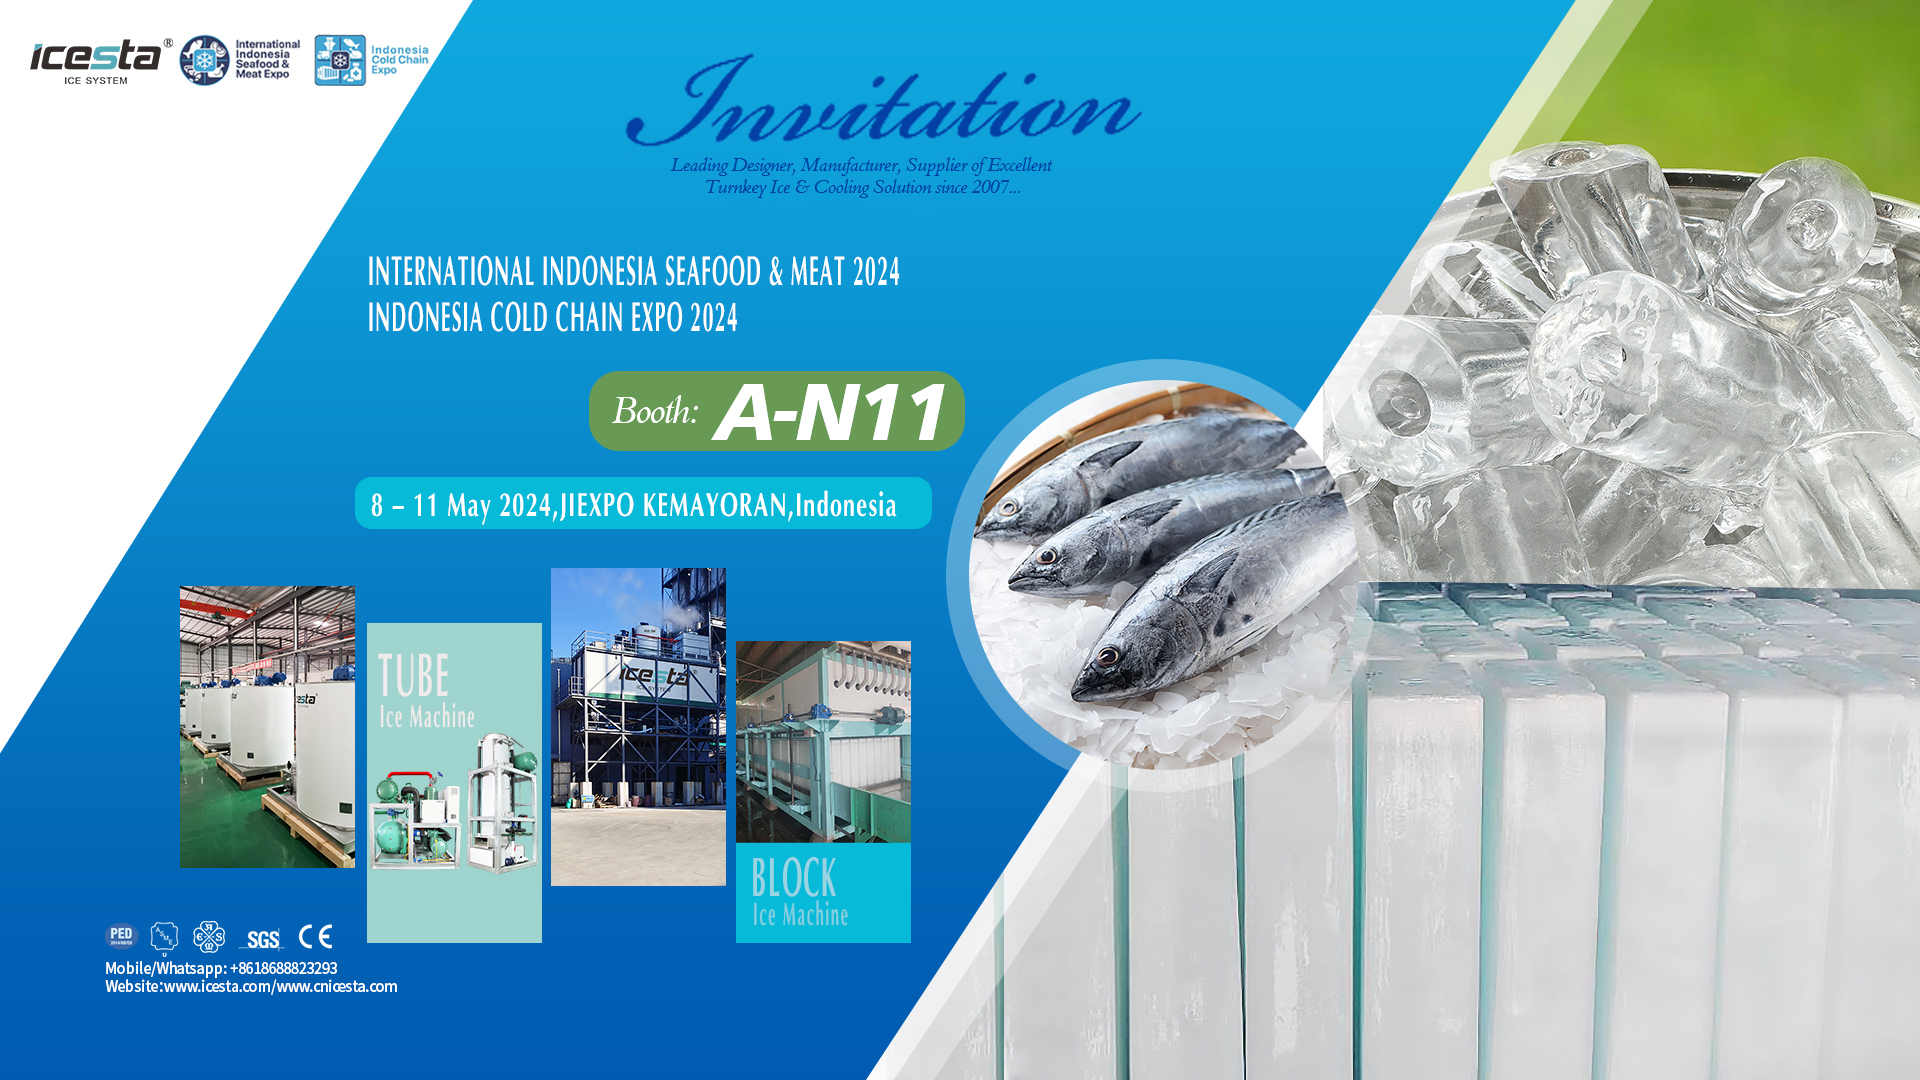 The ICESTA team will participate in International Indonesia Seafood & Meat 2024/ Indonesia Cold Chain Expo 2024